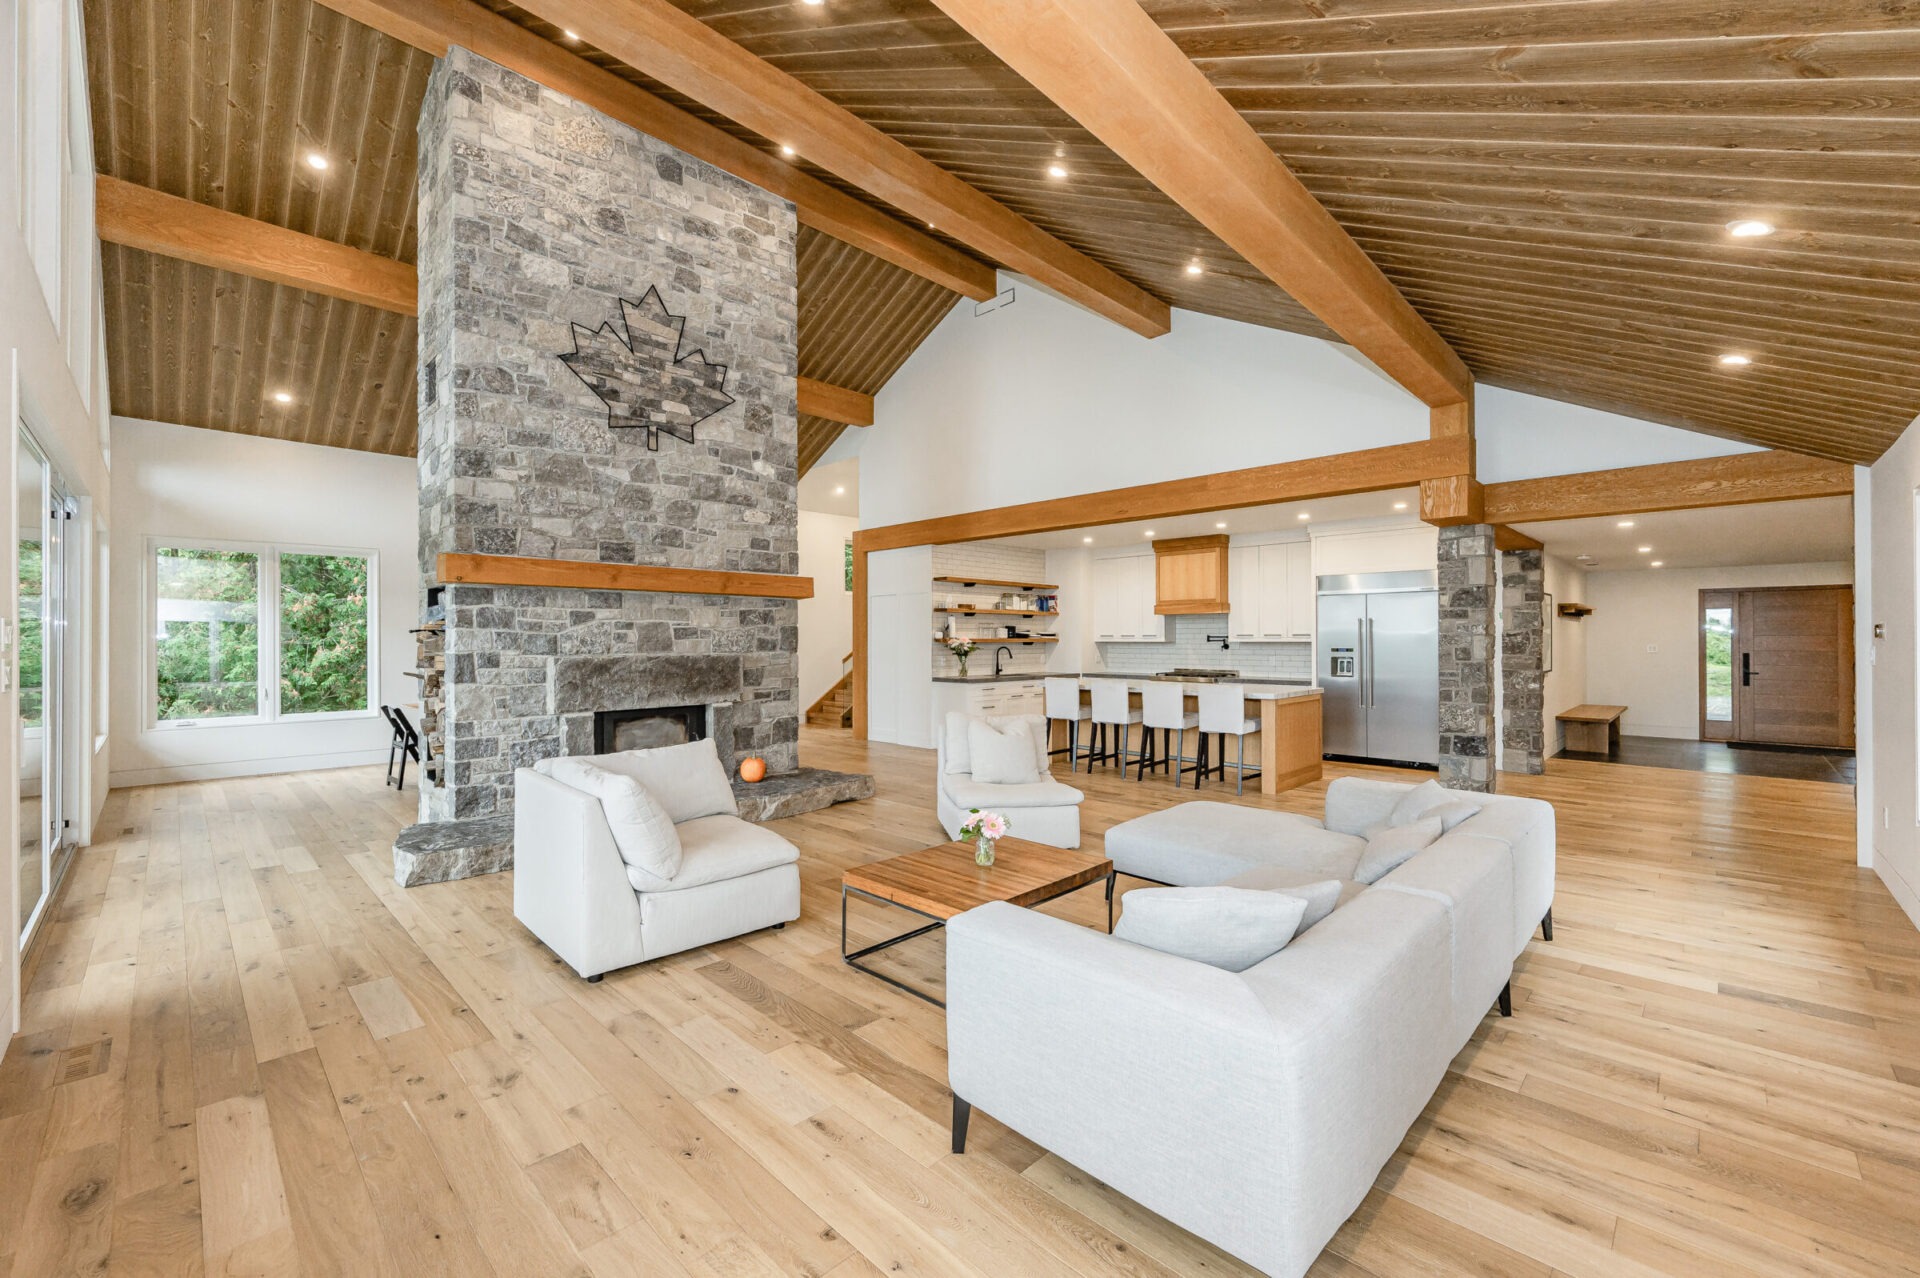 A spacious living room with a high wooden ceiling, stone fireplace, modern furniture, and an open floor plan extending to the kitchen.